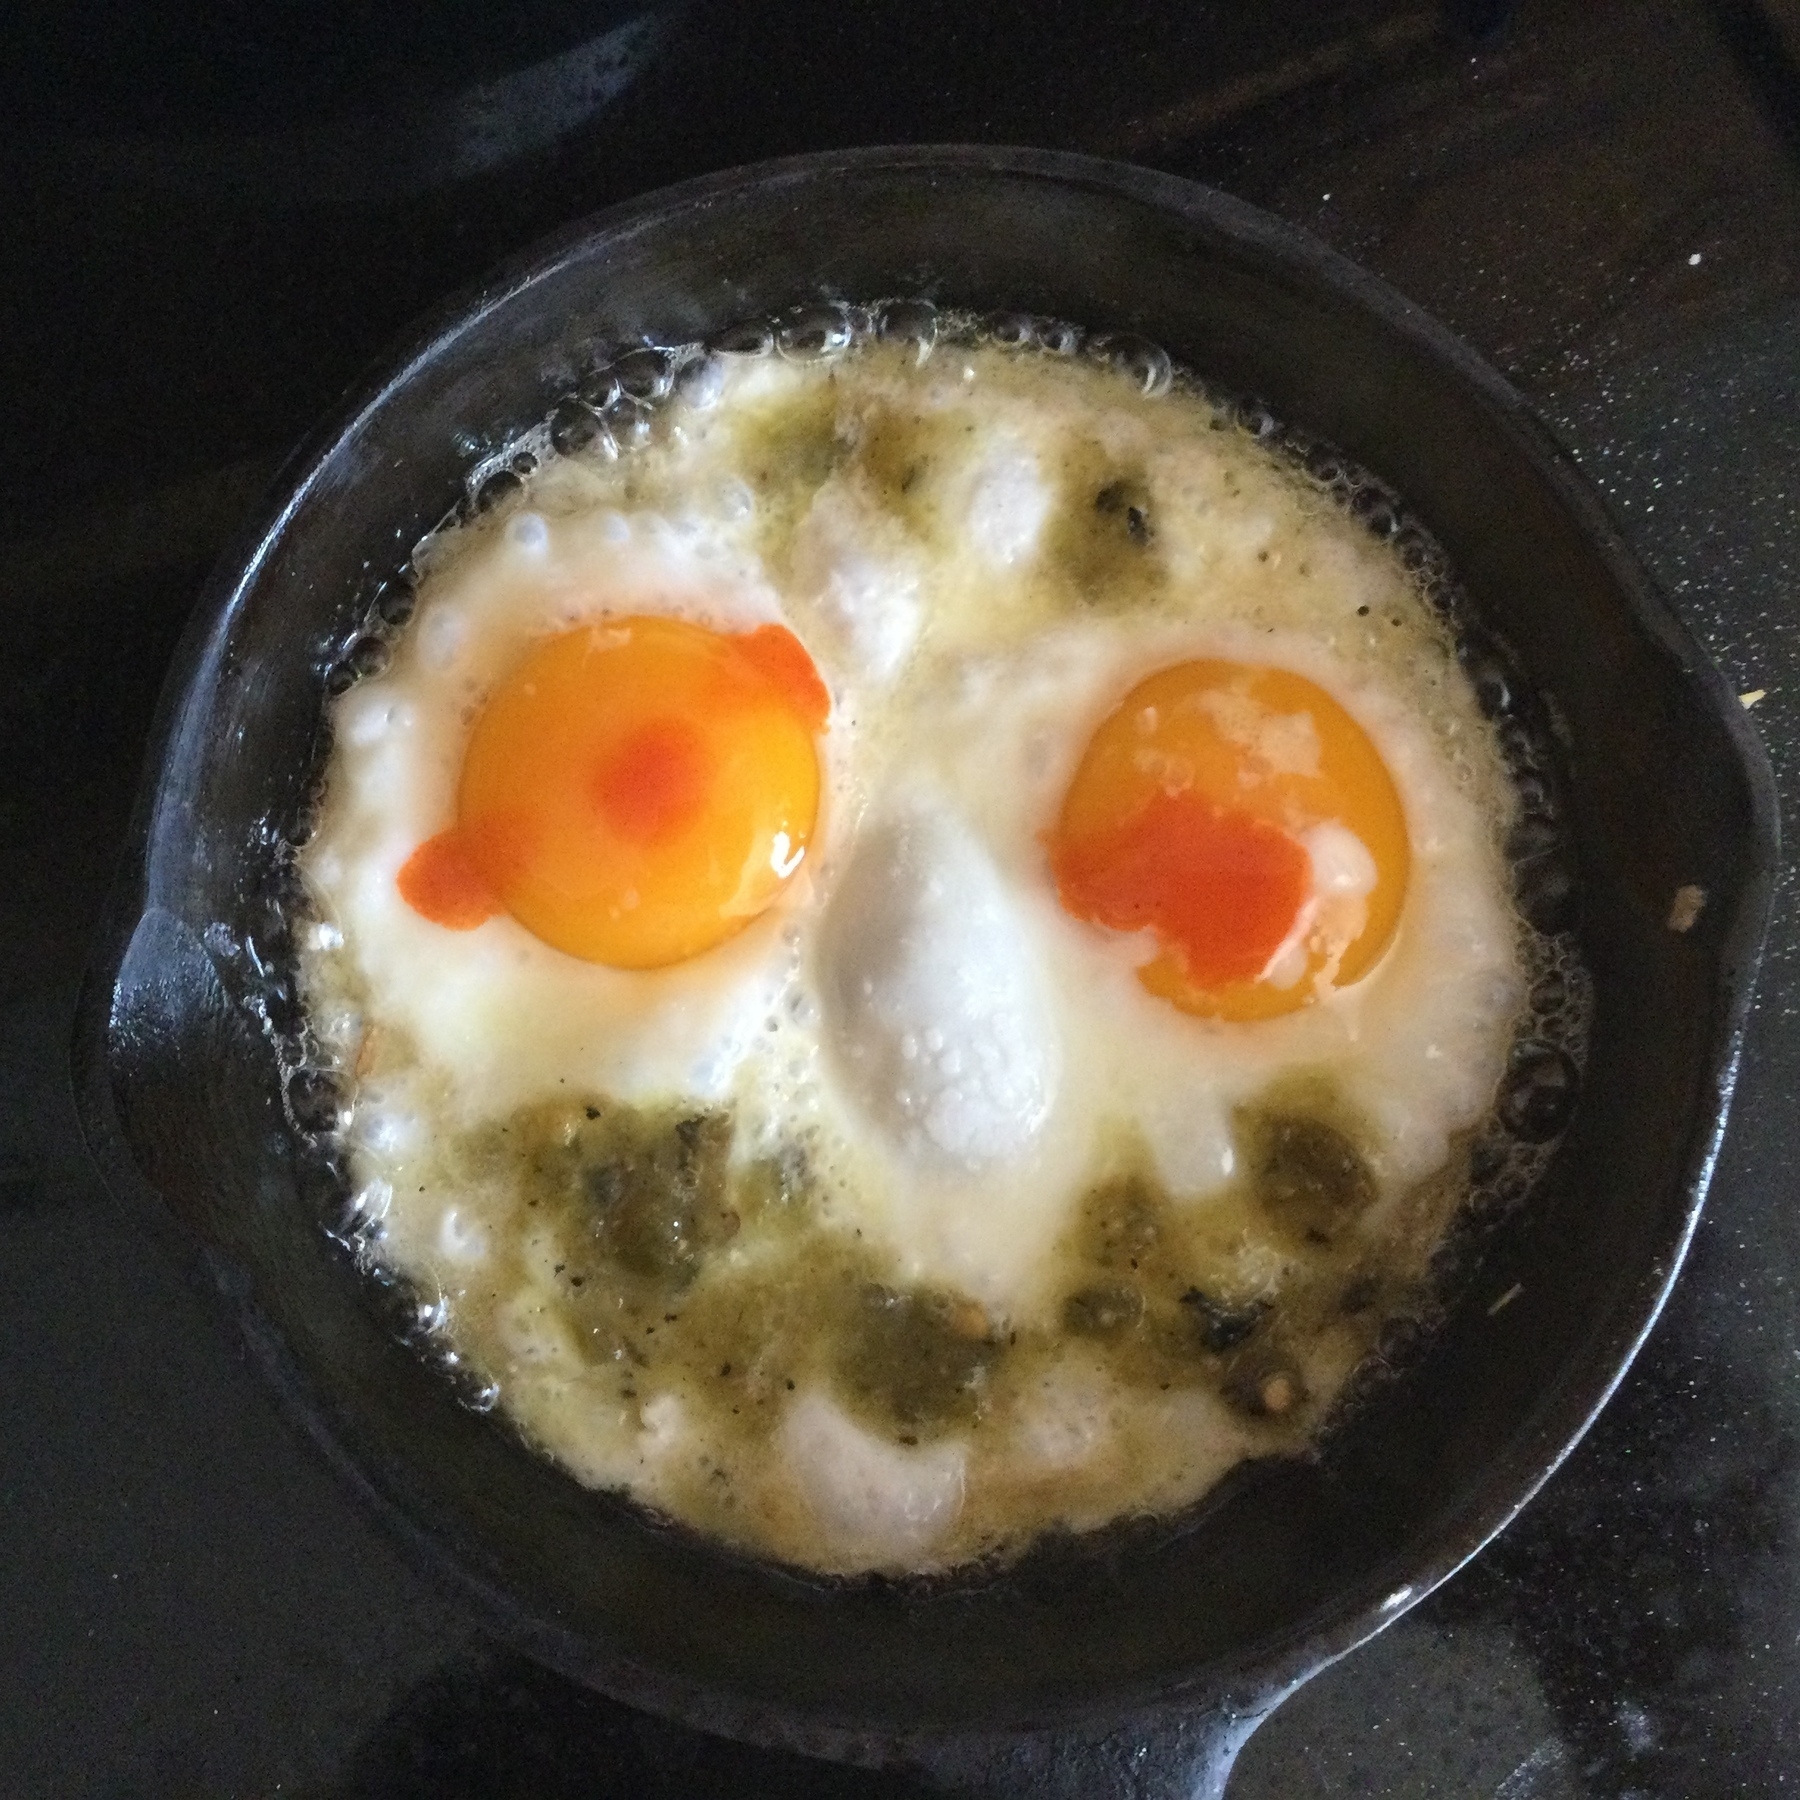 Two fried eggs in a cast iron pan, the yolks look like eyes, a bubble of egg white looks like a nose, an arc of grfeen salsa forms the mouth, and each eye is dotted with red hot sauce.